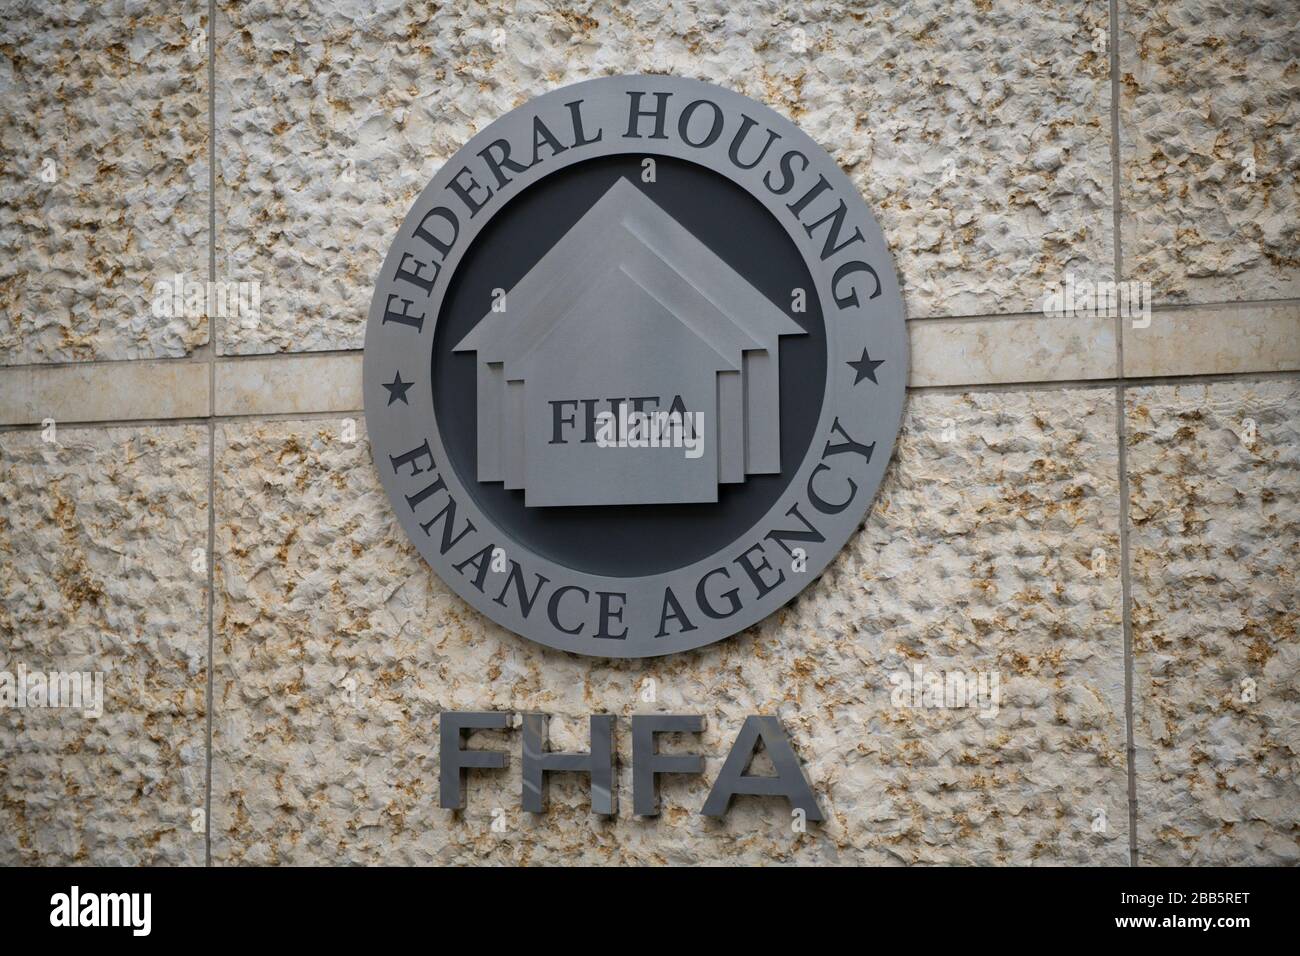 The logo for the Federal Housing Finance Agency (FHFA) as seen in  Washington, D.C., on Monday, March 30, 2020, amid the coronavirus pandemic.  Over the weekend President Trump announced the Centers for